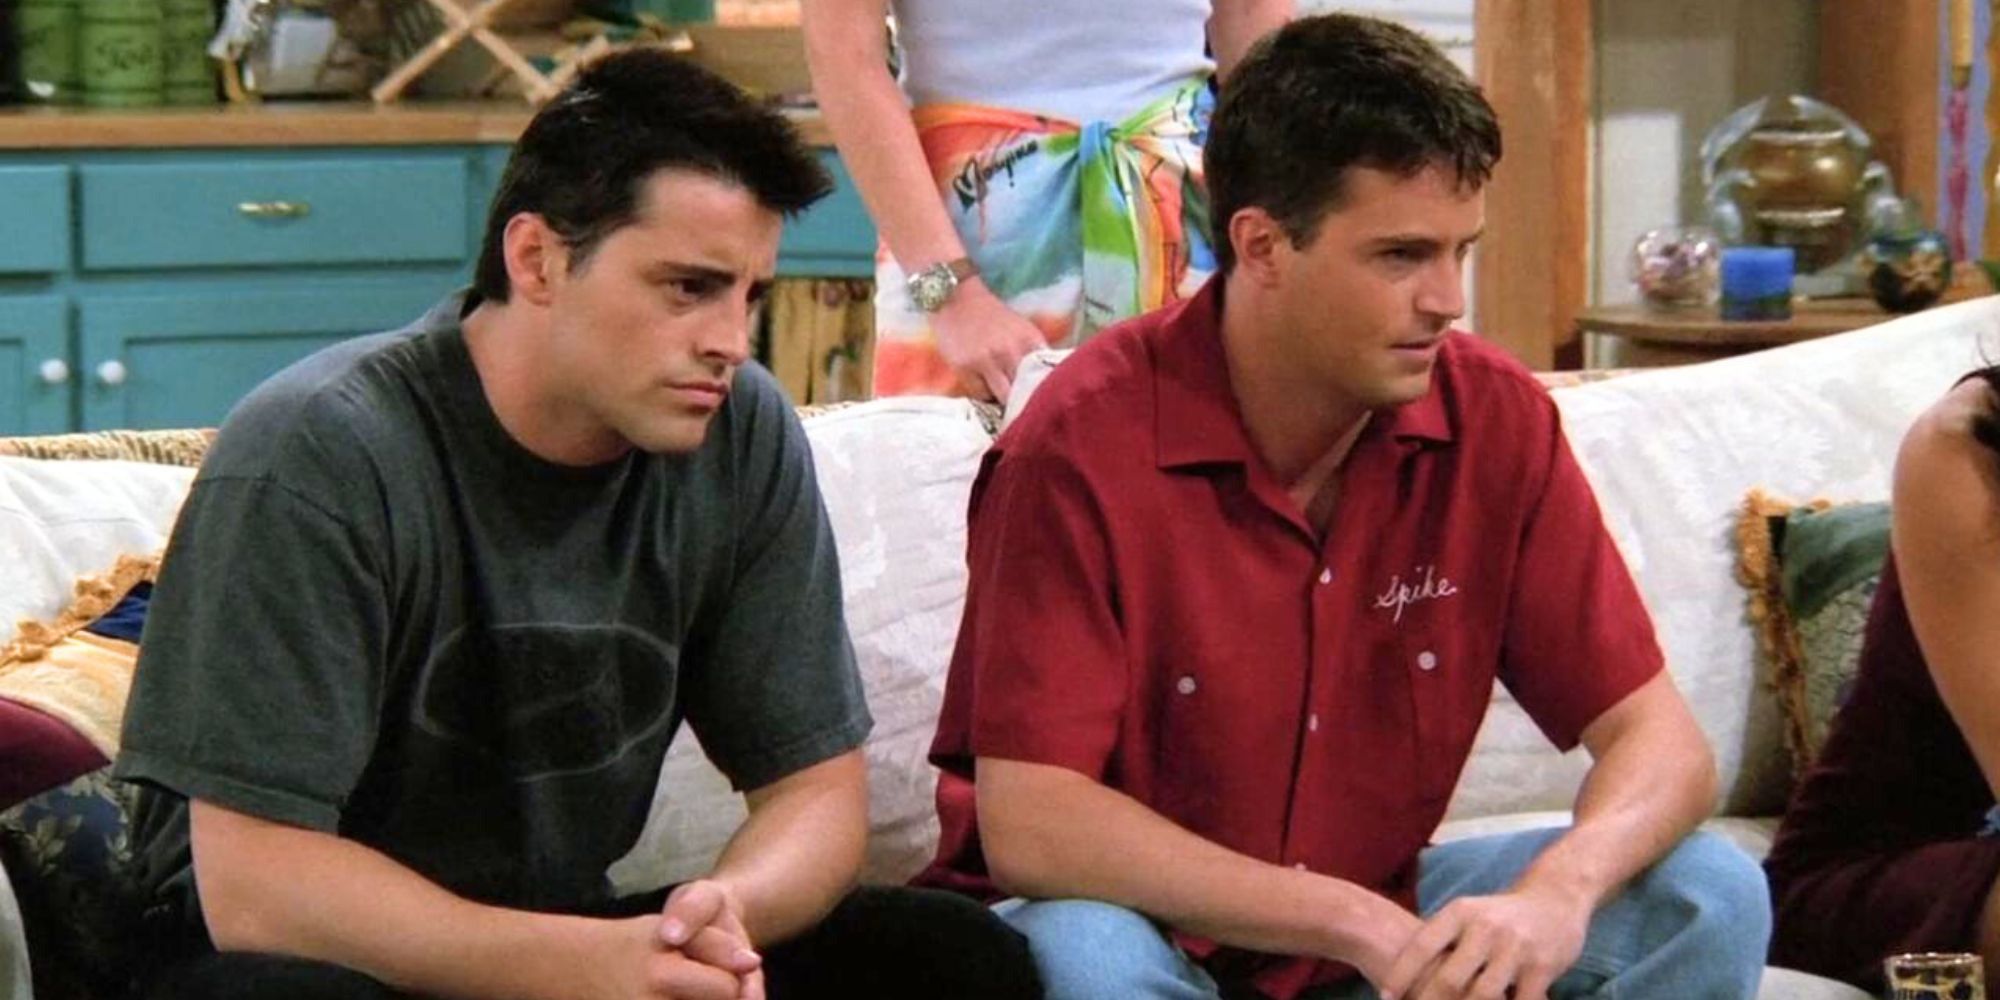 Joey Tribianni sitting next to Chandler Bing on a couch in Friends